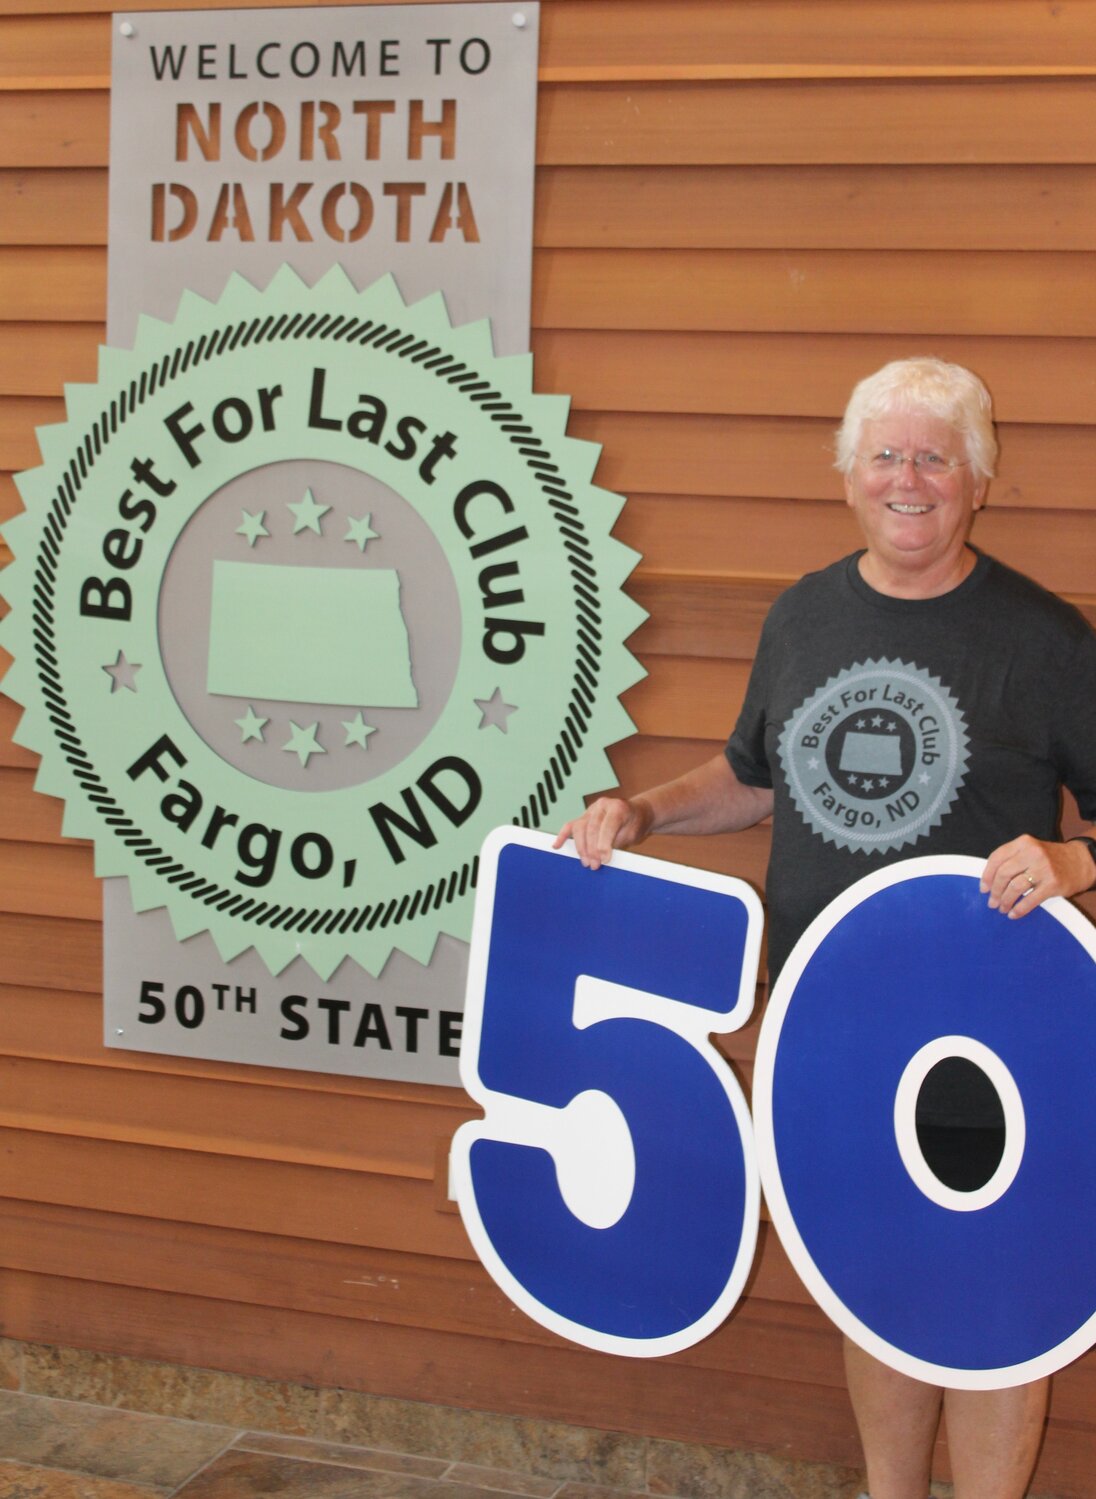 North Dakota is often the last of the 50 states people will visit, because it takes a concerted effort to do so. In recognition, it has established the "Best for Last" club, of which Susan Wade became an honored member.